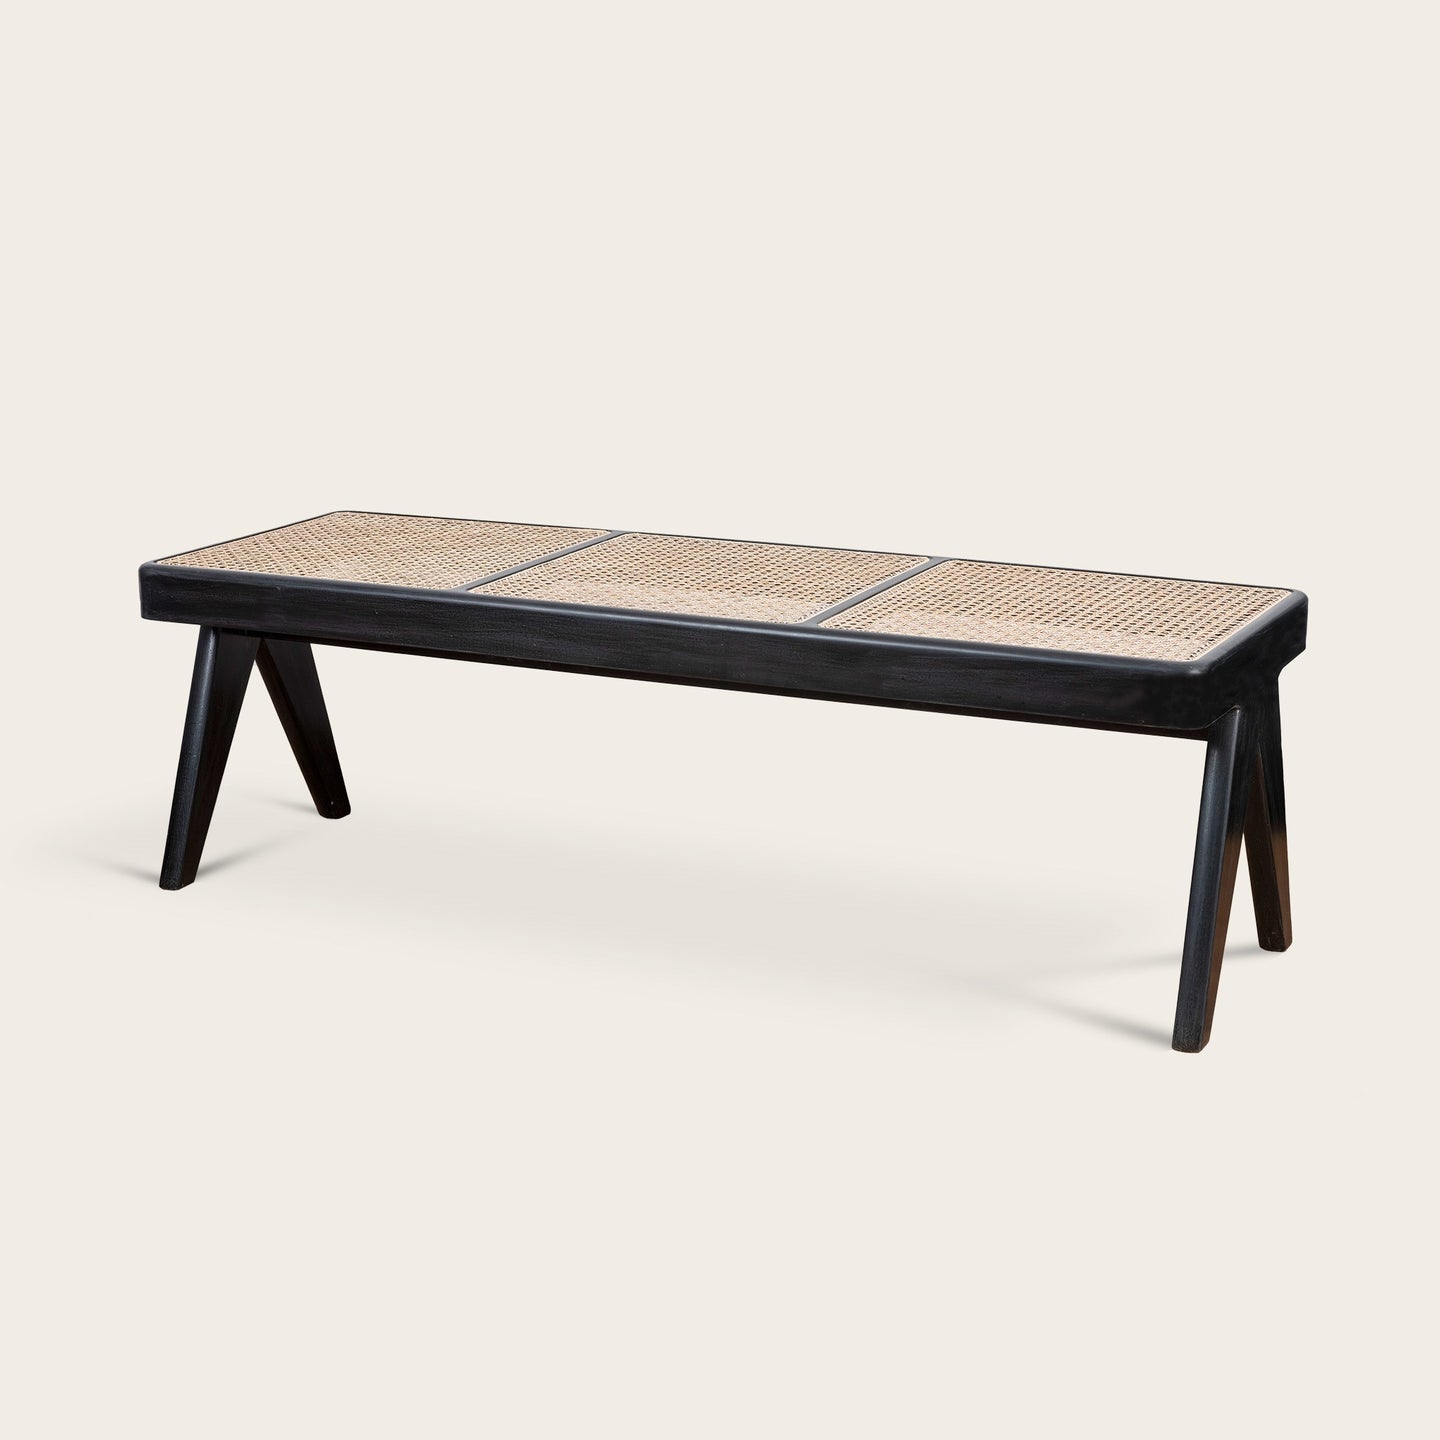 Pierre Jeanneret Library Bench - Charcoal